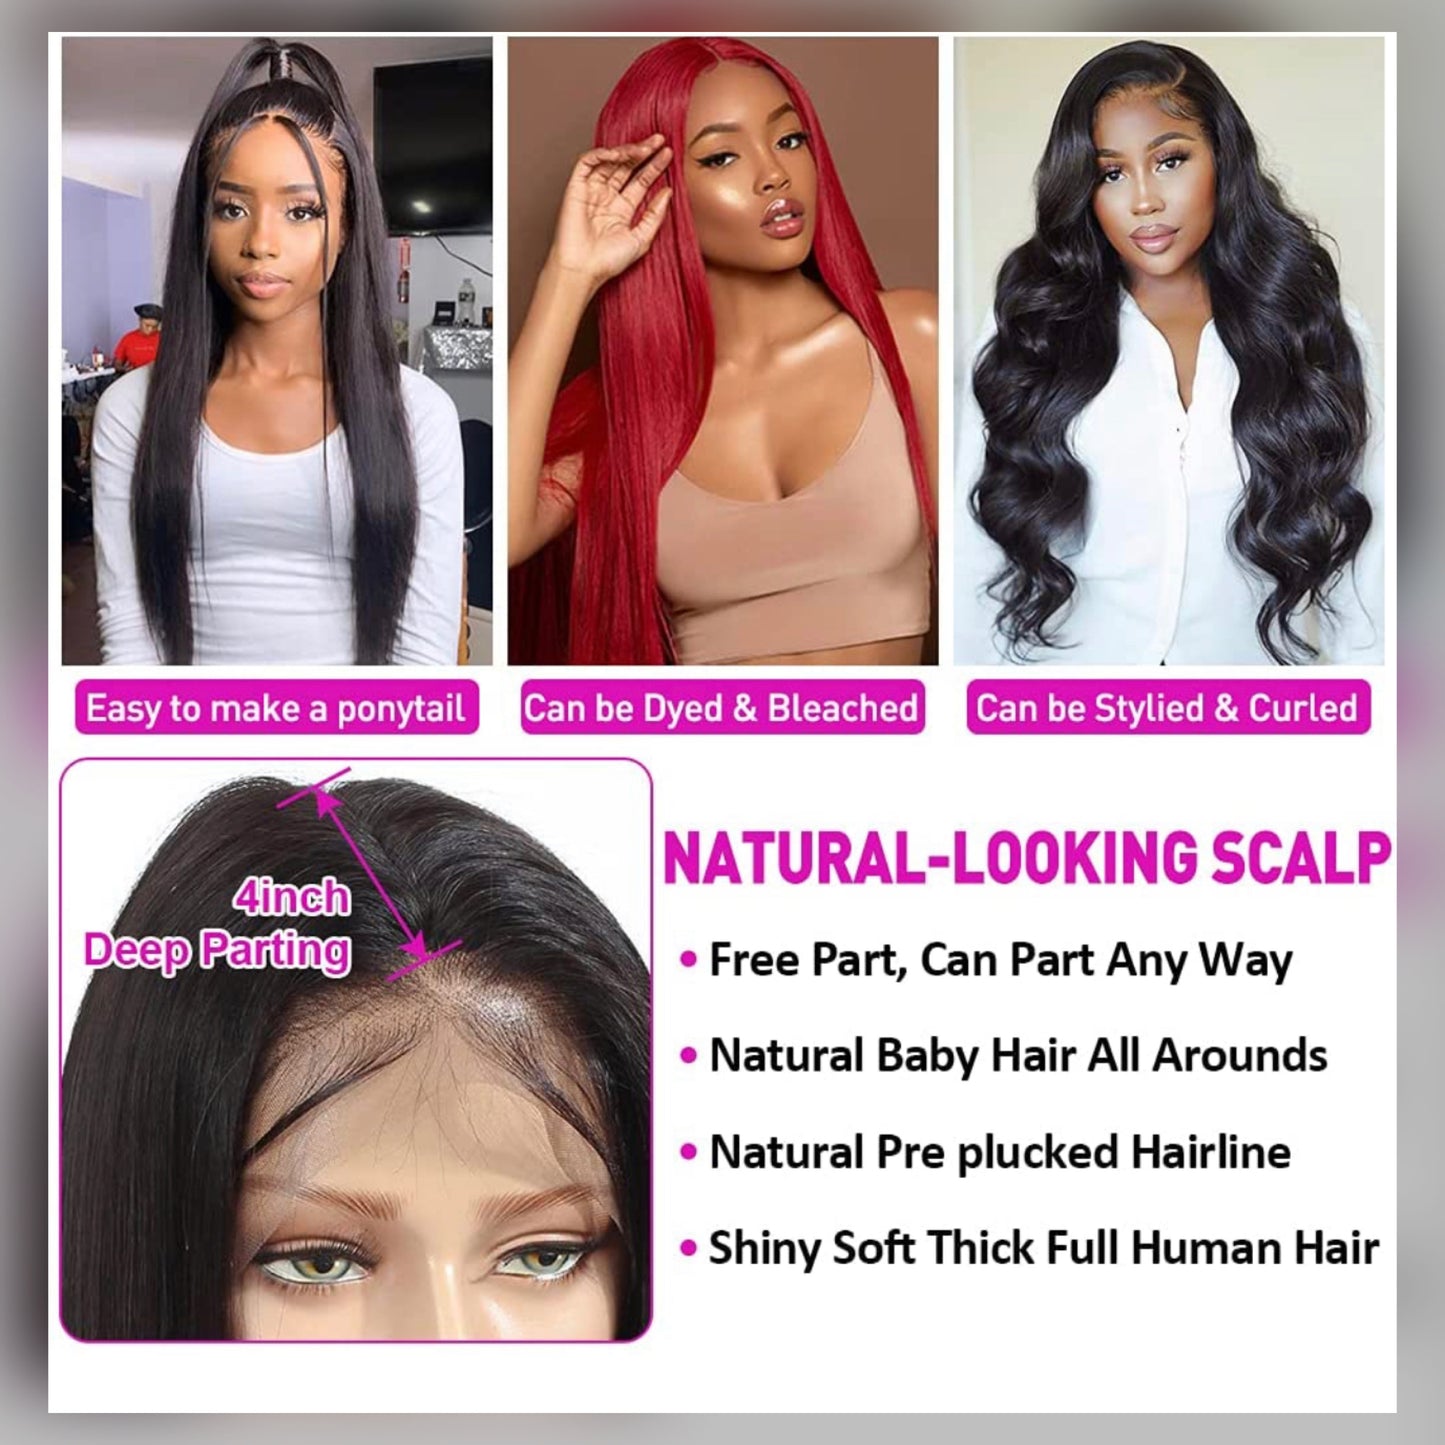 Straight Lace Front Wig Human Hair